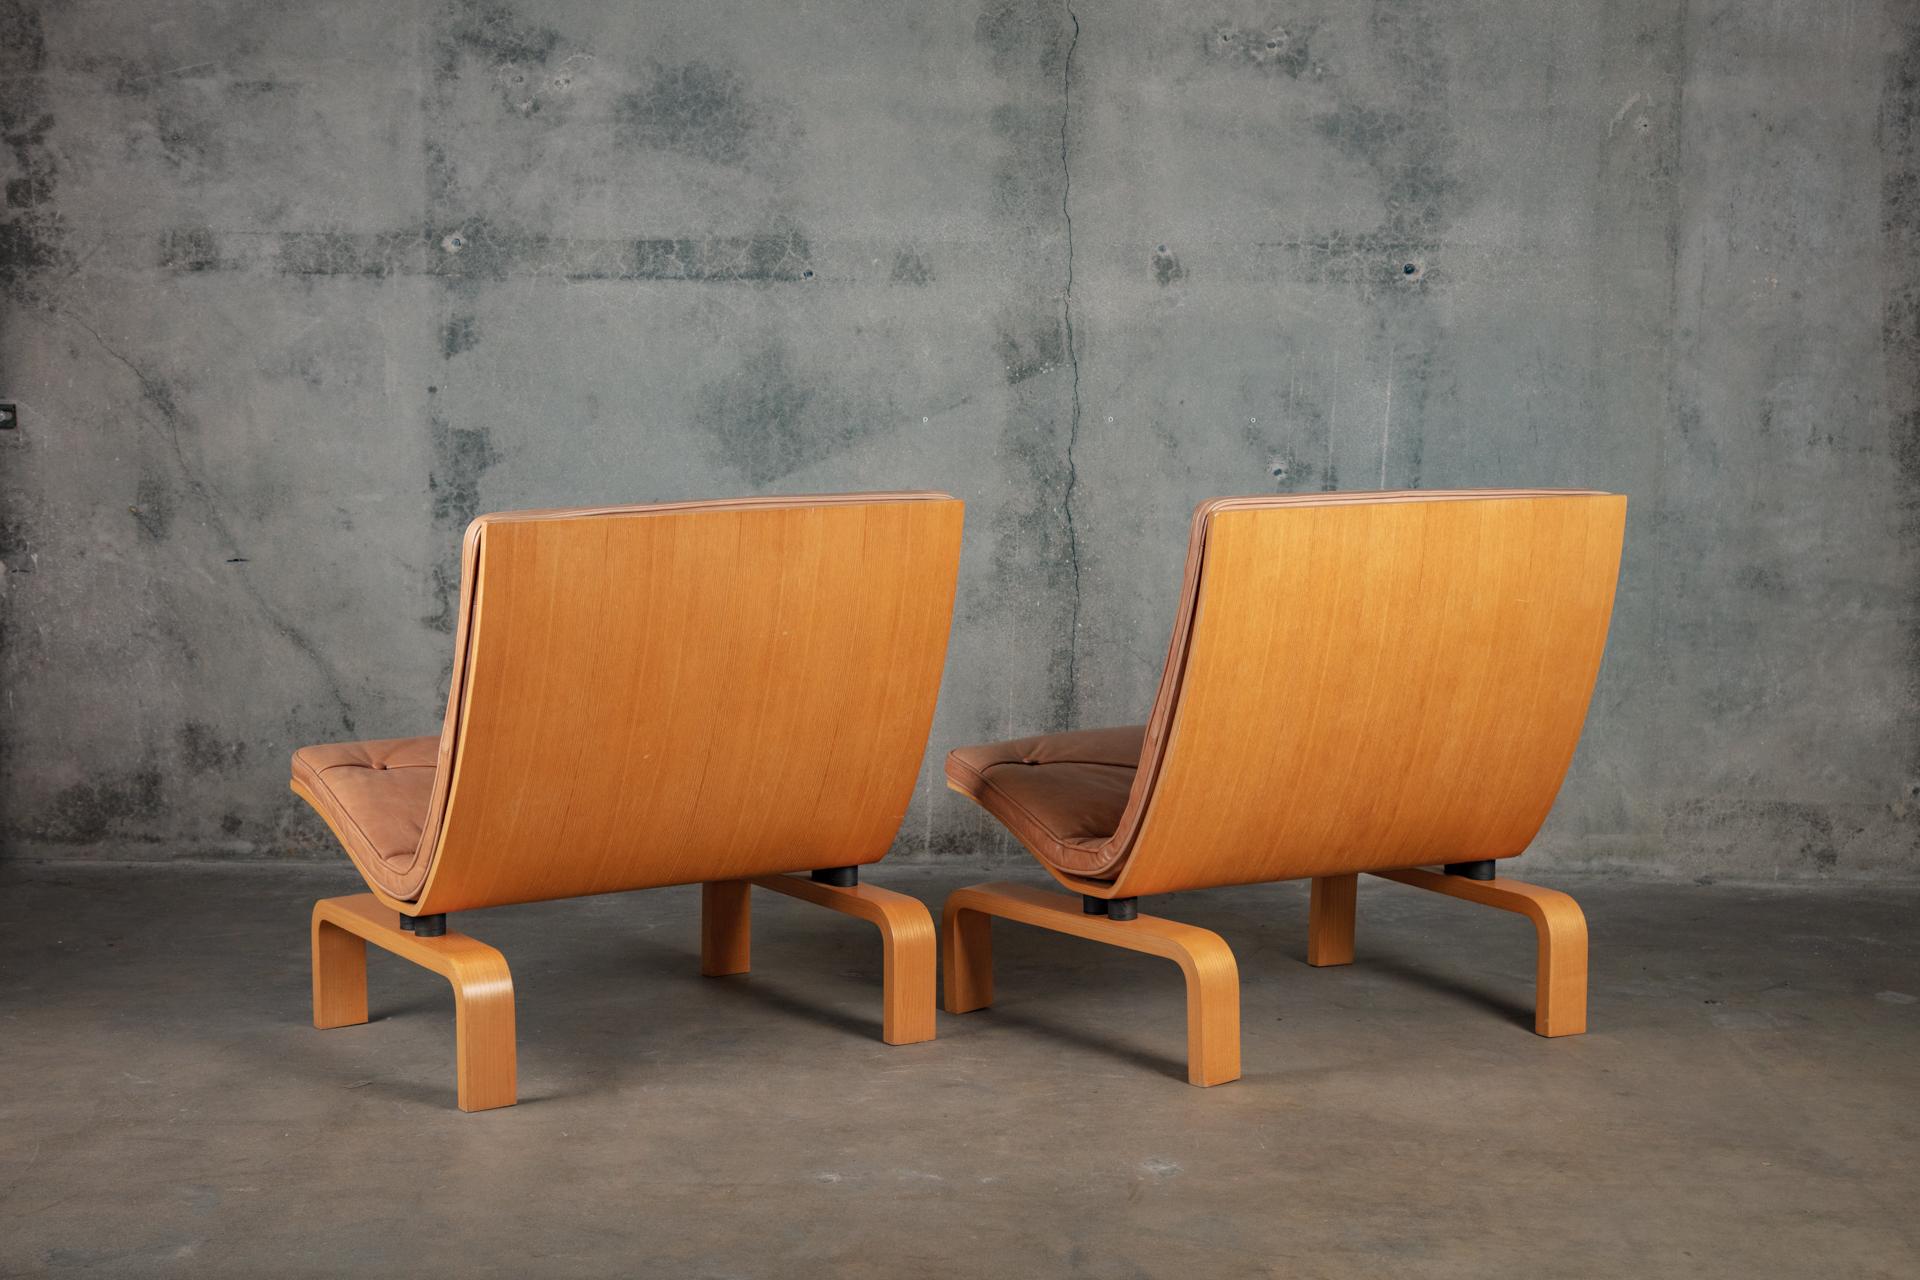 Pair of Poul Kjaerholm PK27 easy chairs with leather upholstery, 1950s.